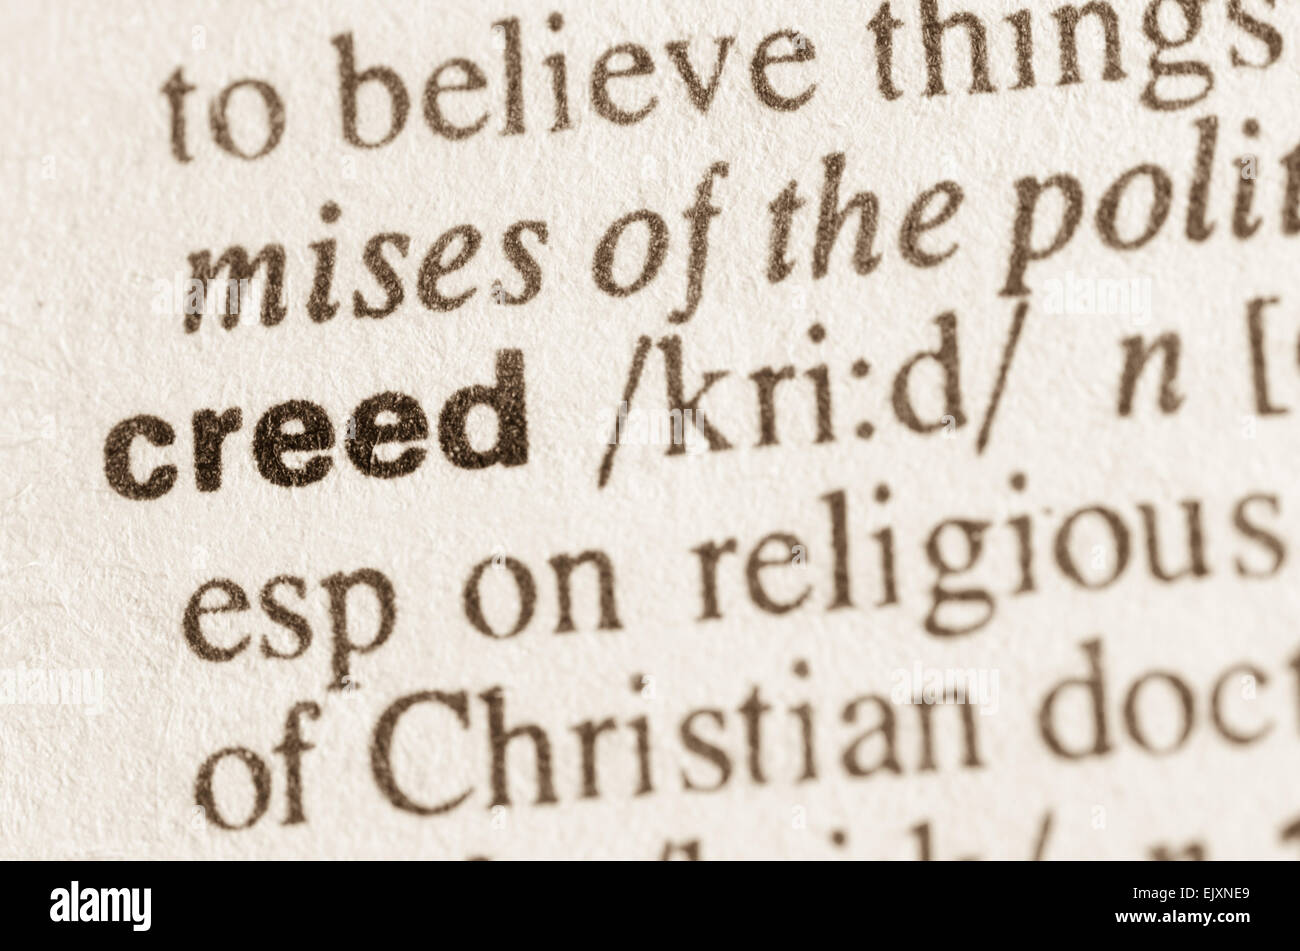 Definition of word creed in dictionary Stock Photo